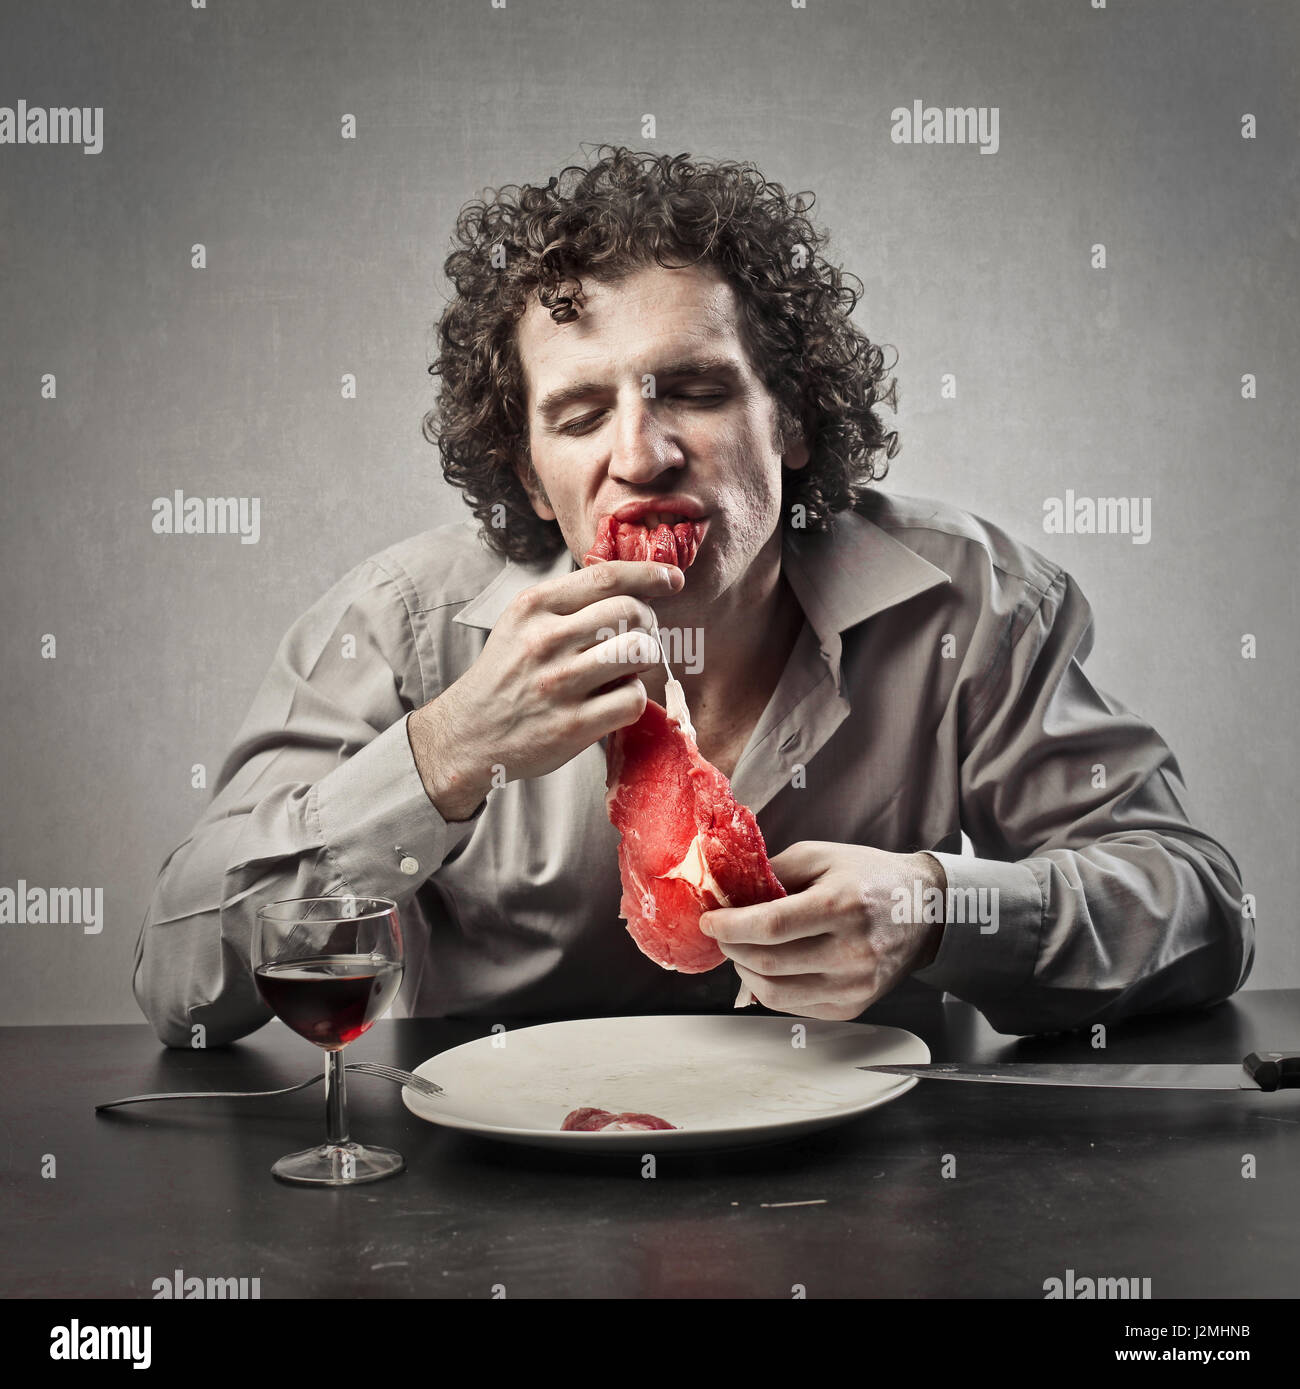 Man eating raw meat Stock Photo